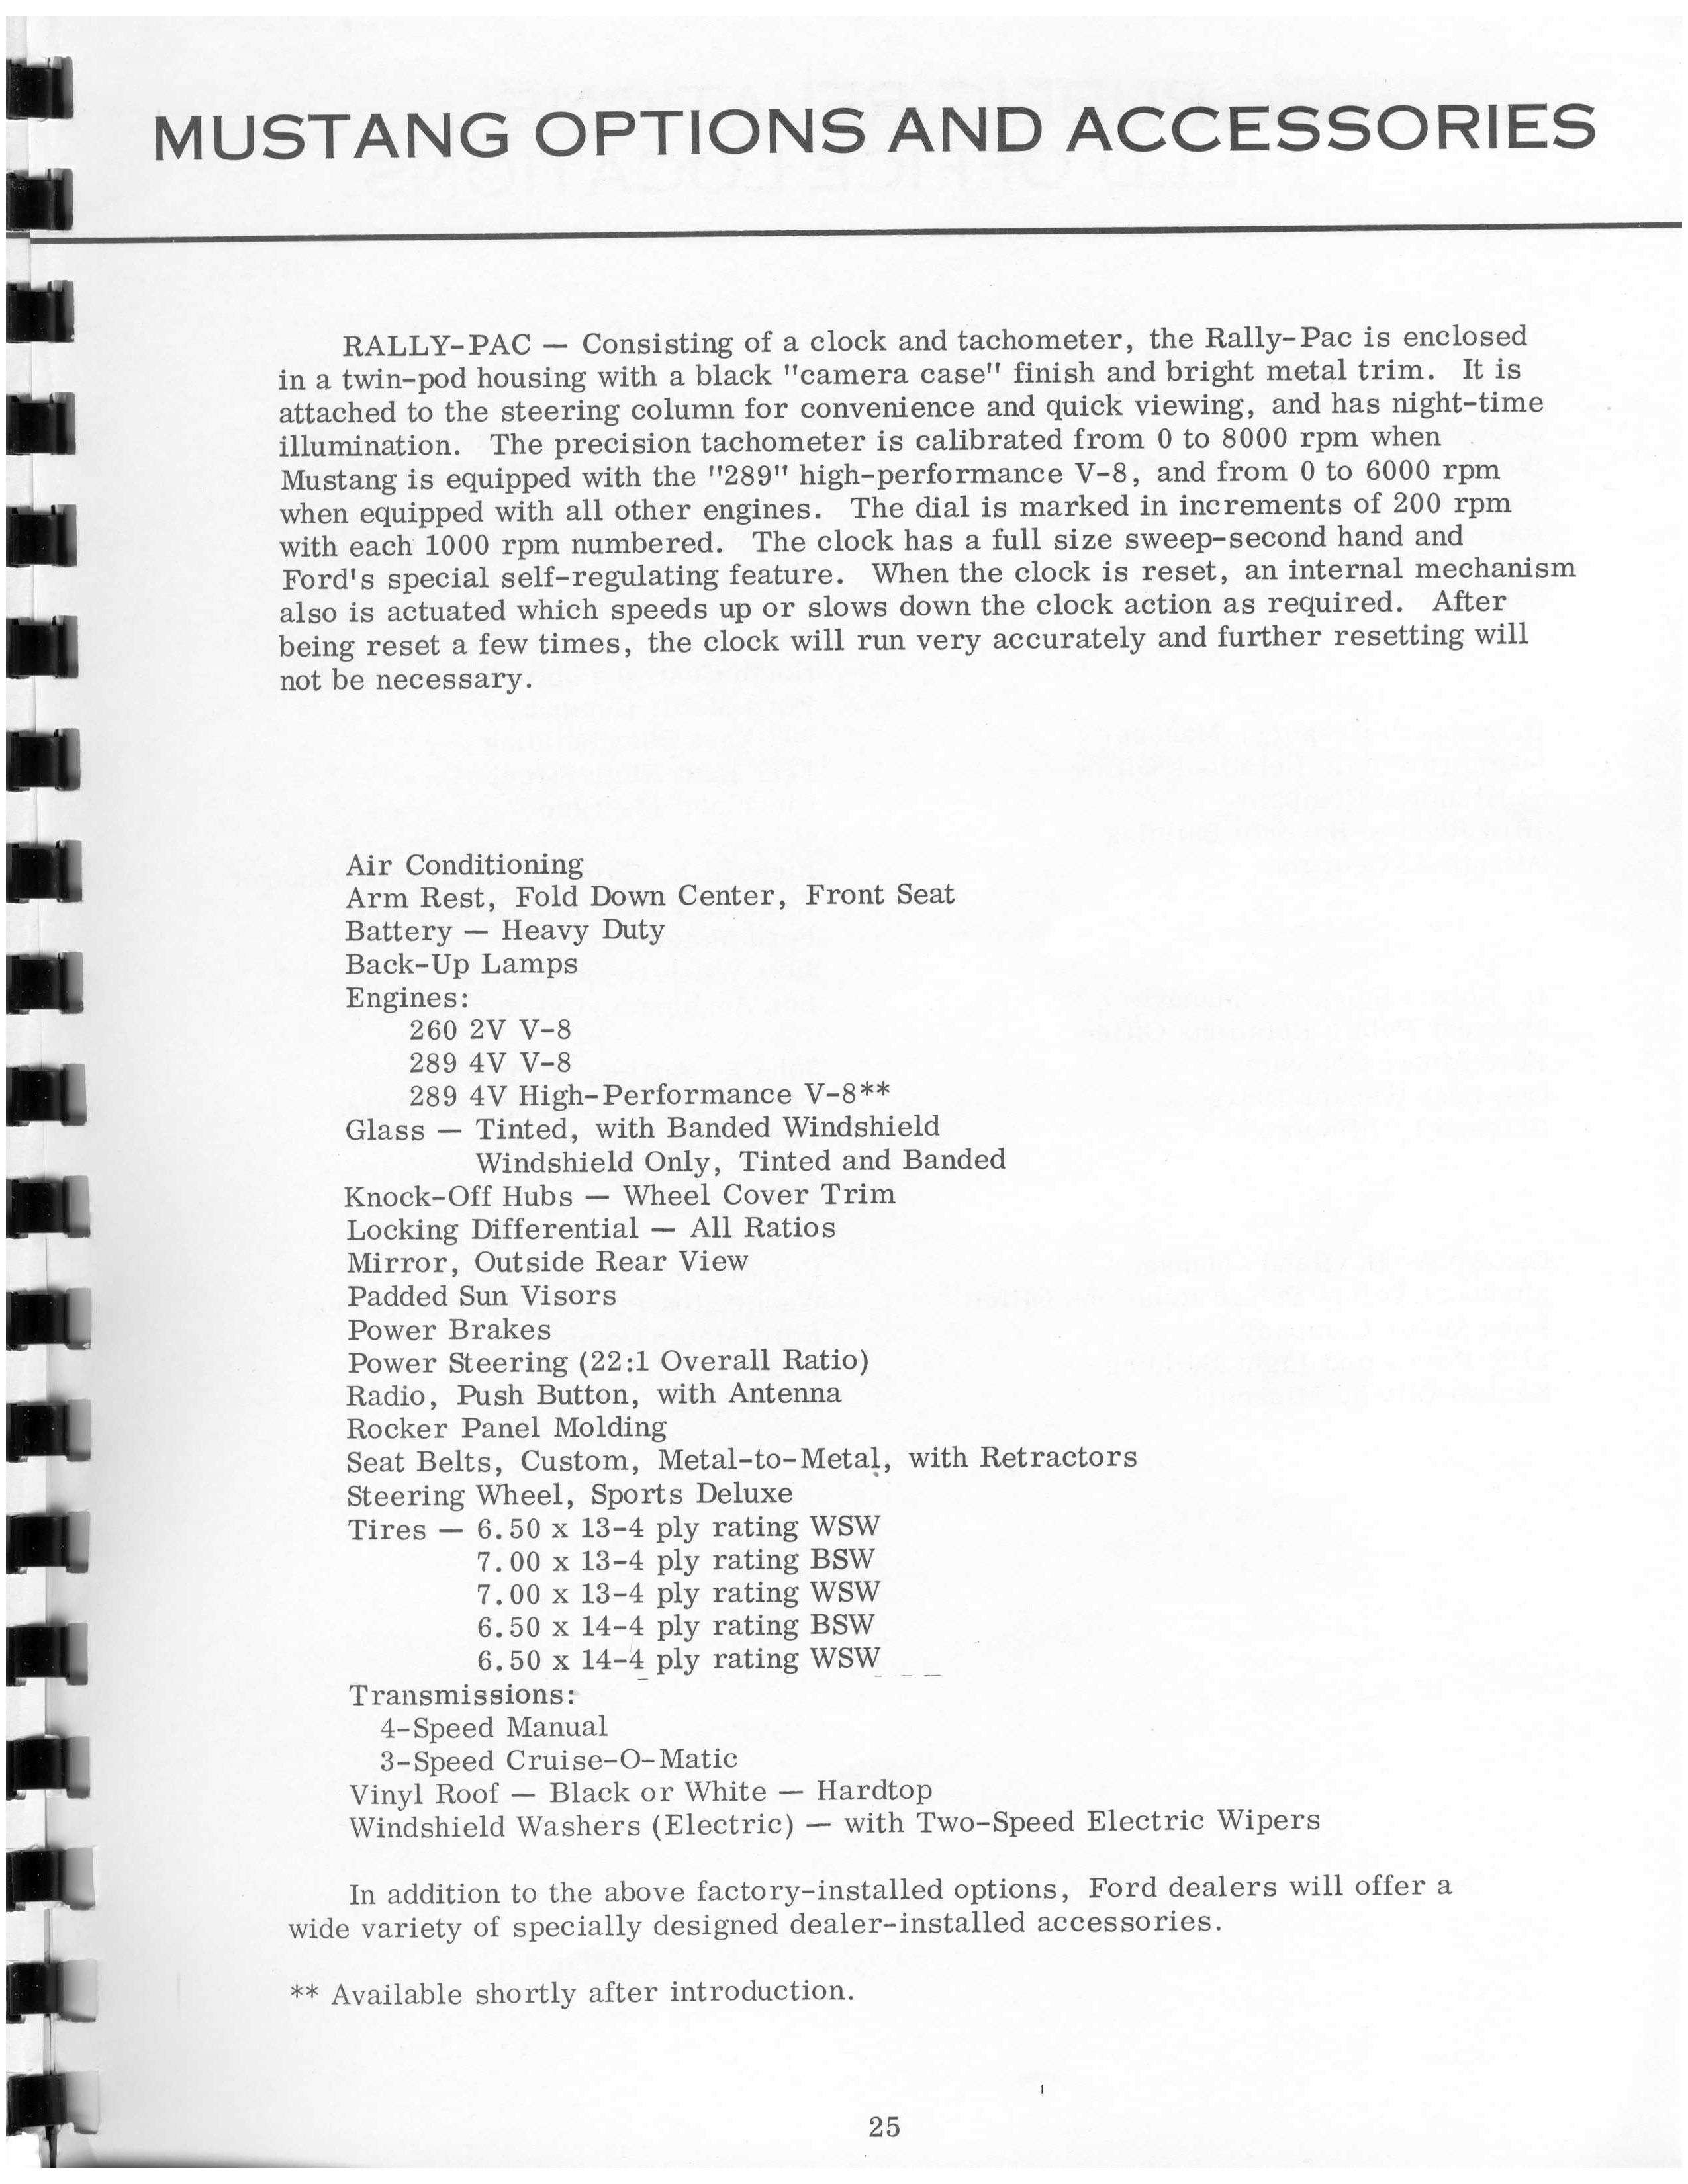 1964_Ford_Mustang_Press_Packet-25